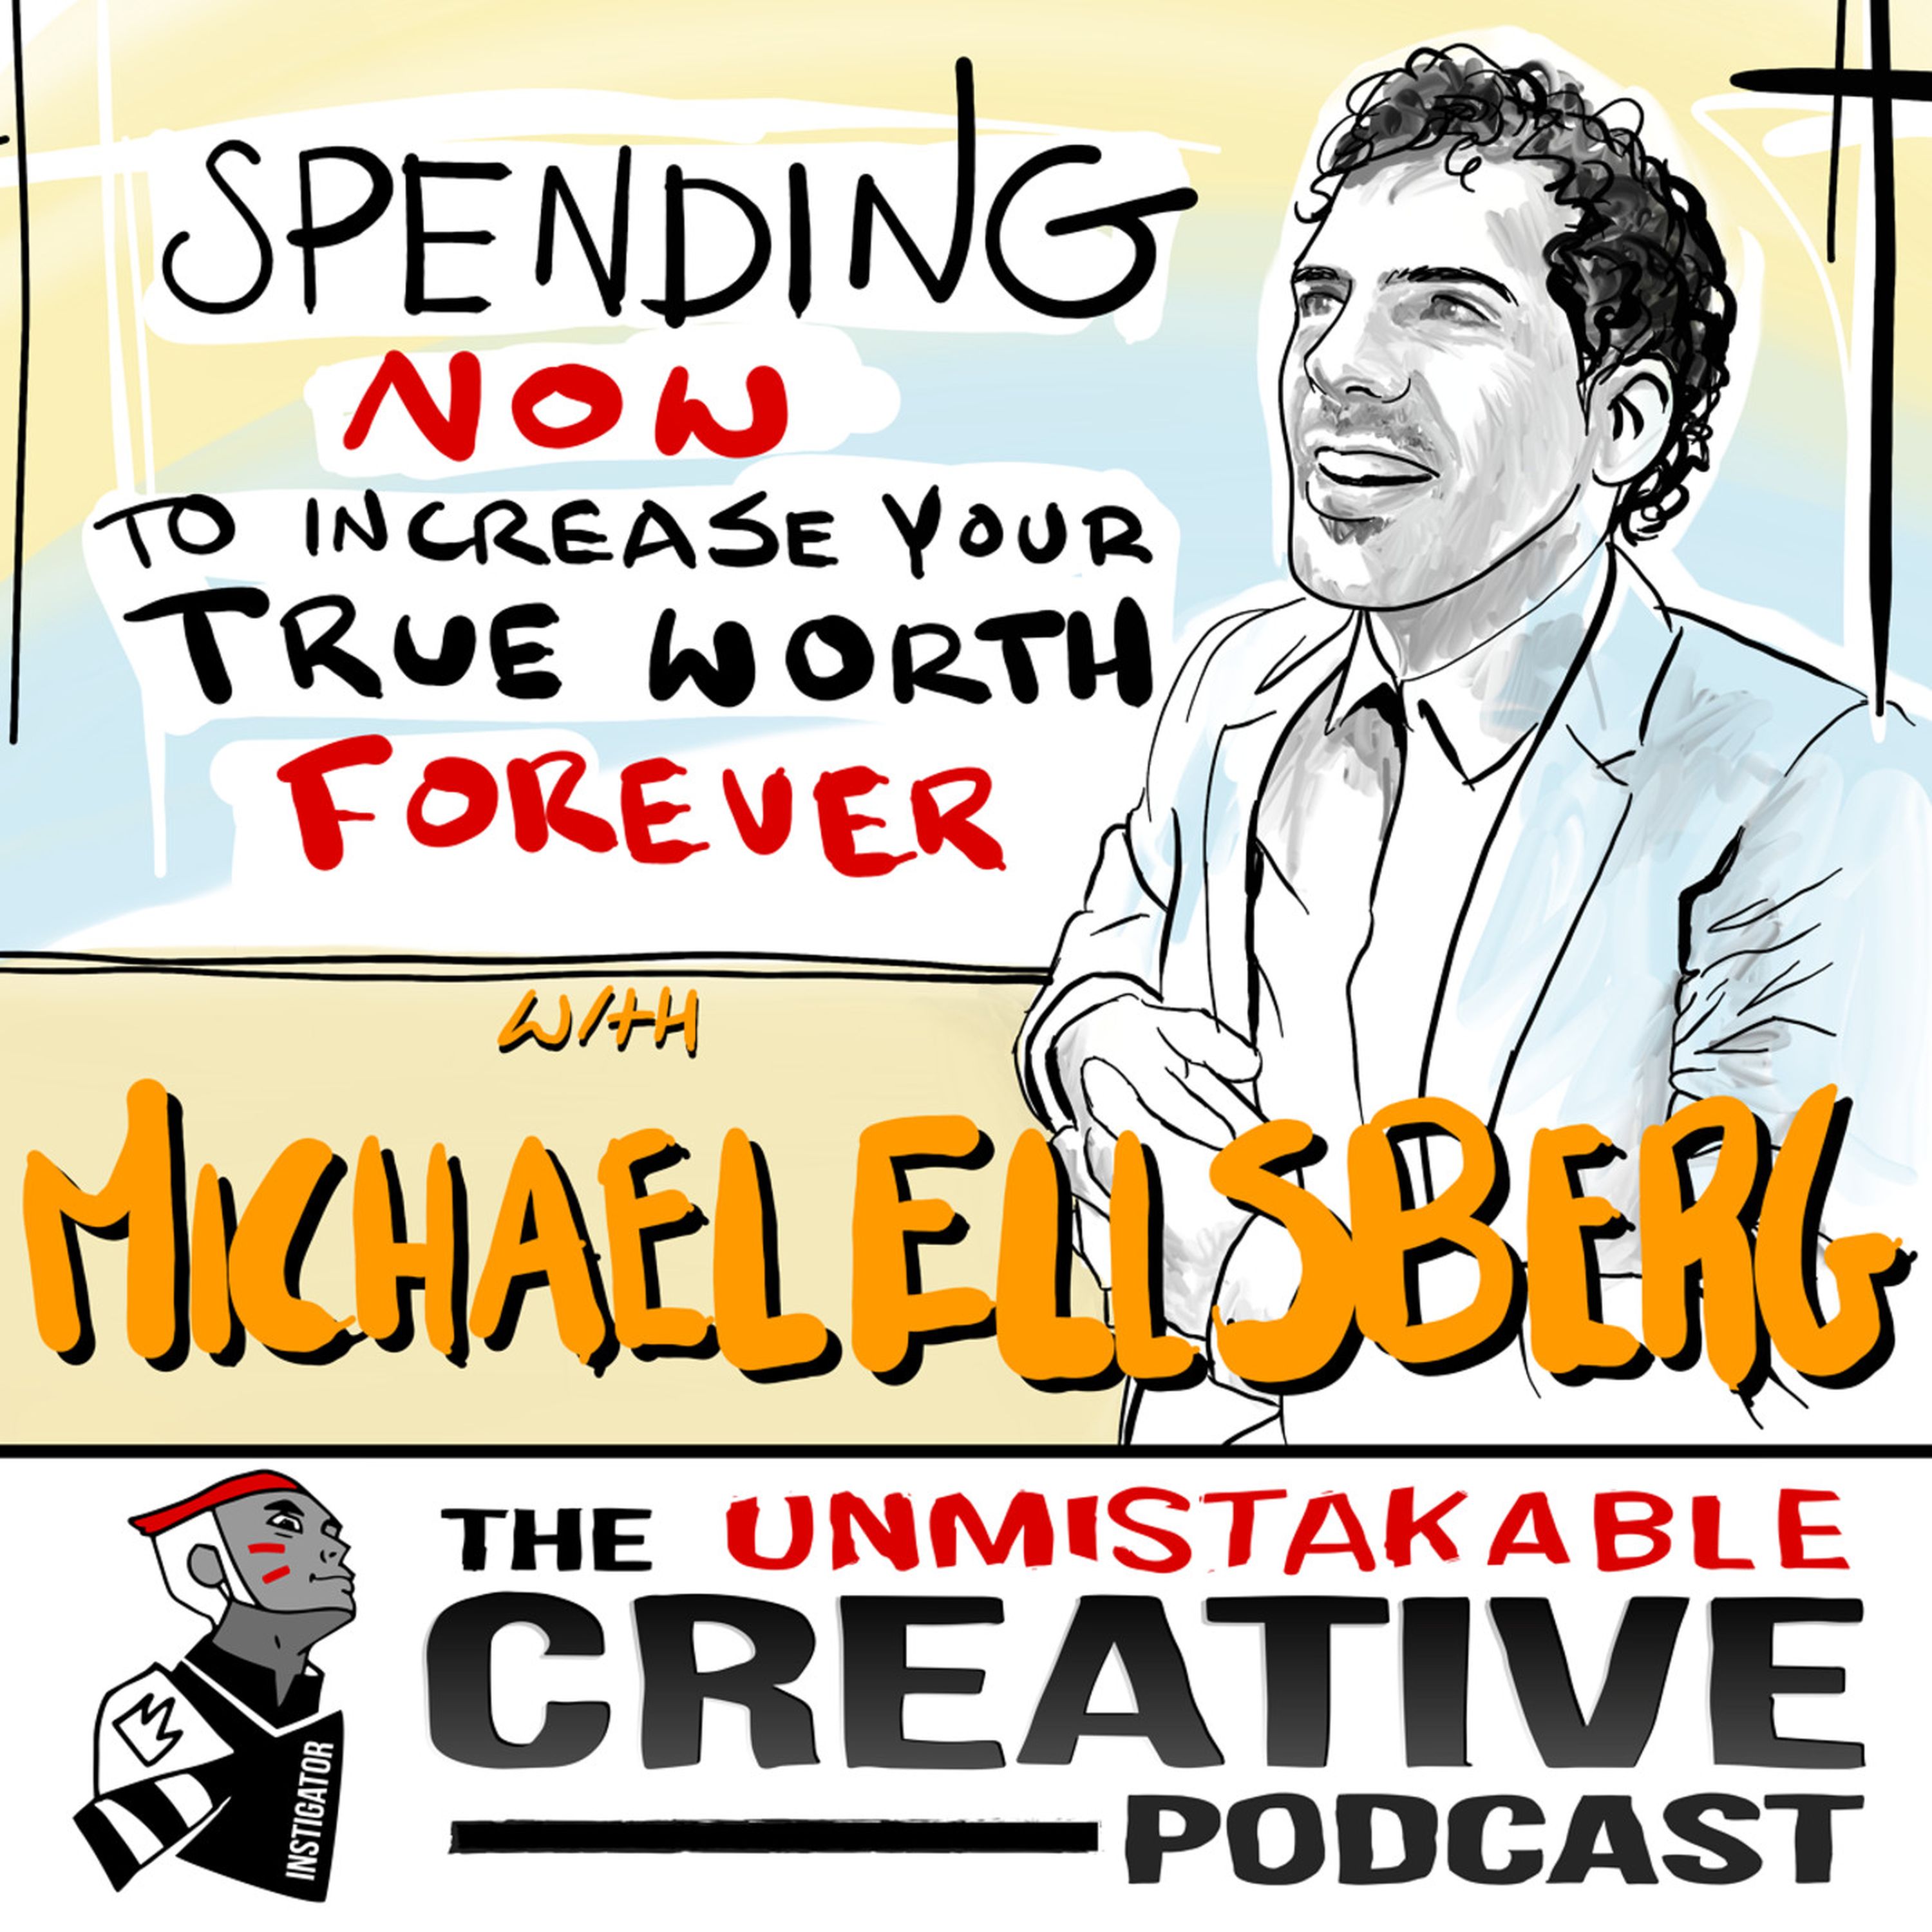 Spending Now to Increase Your True Wealth Forever with Michael Ellsberg